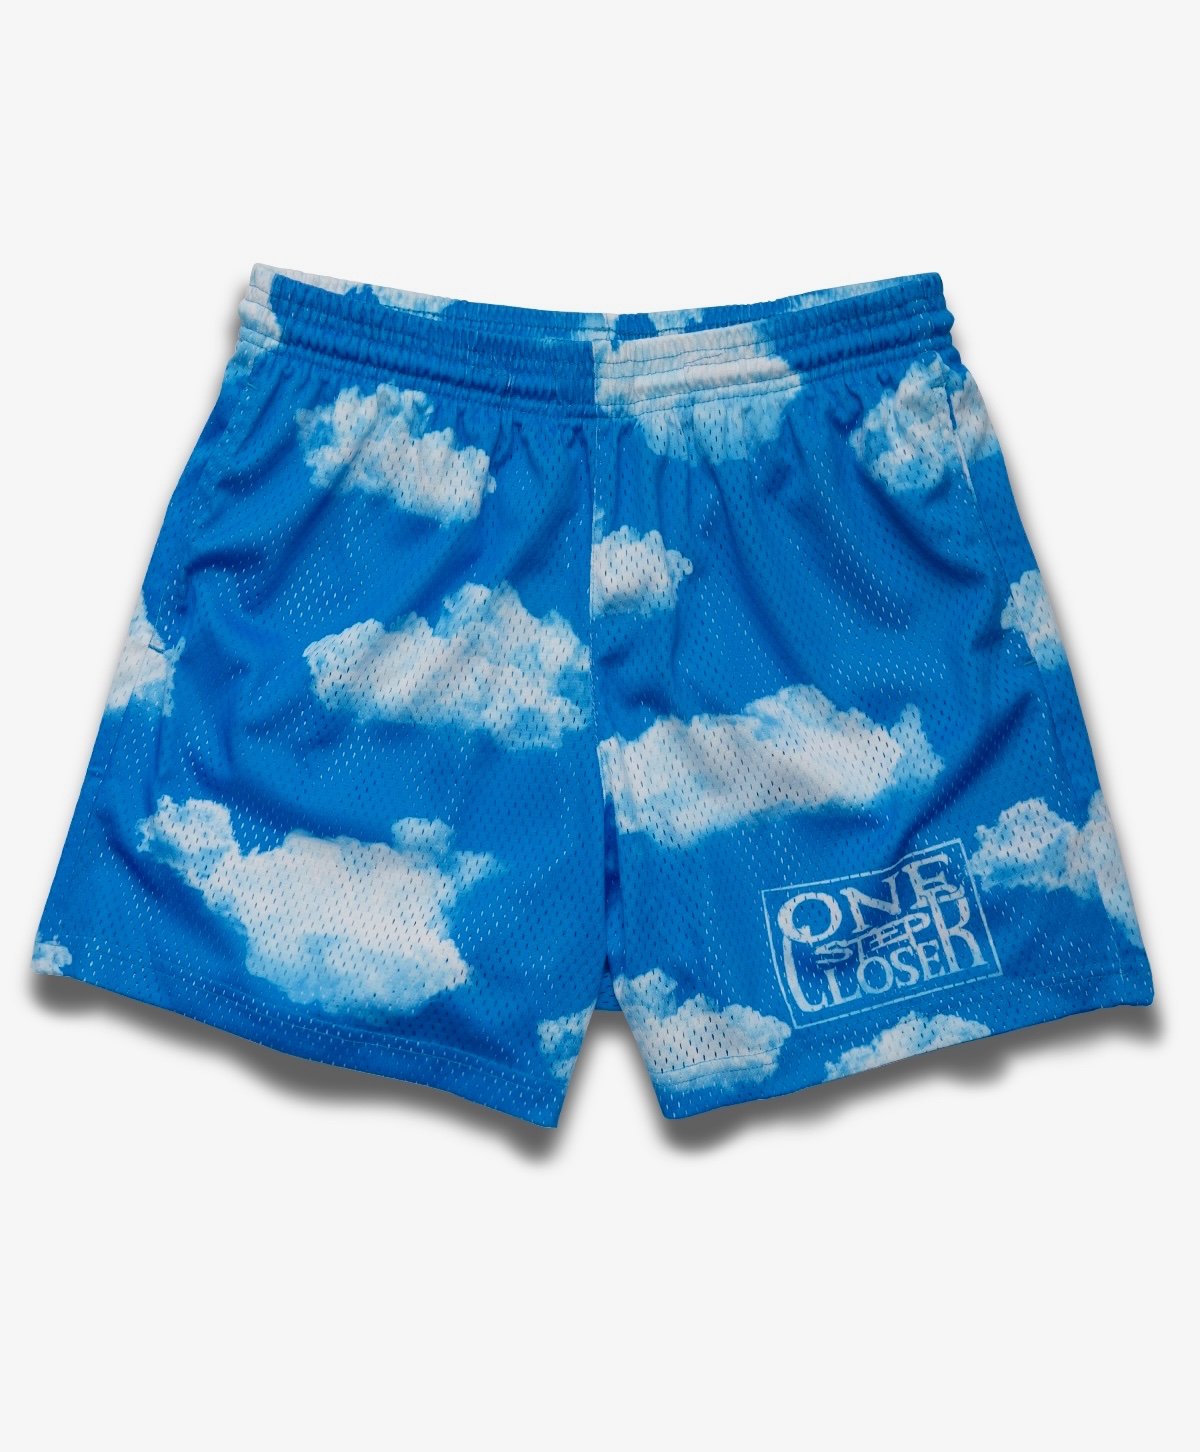 Mesh Shorts | Sublimated Design | 190g Weight Fabric | One Step Closer